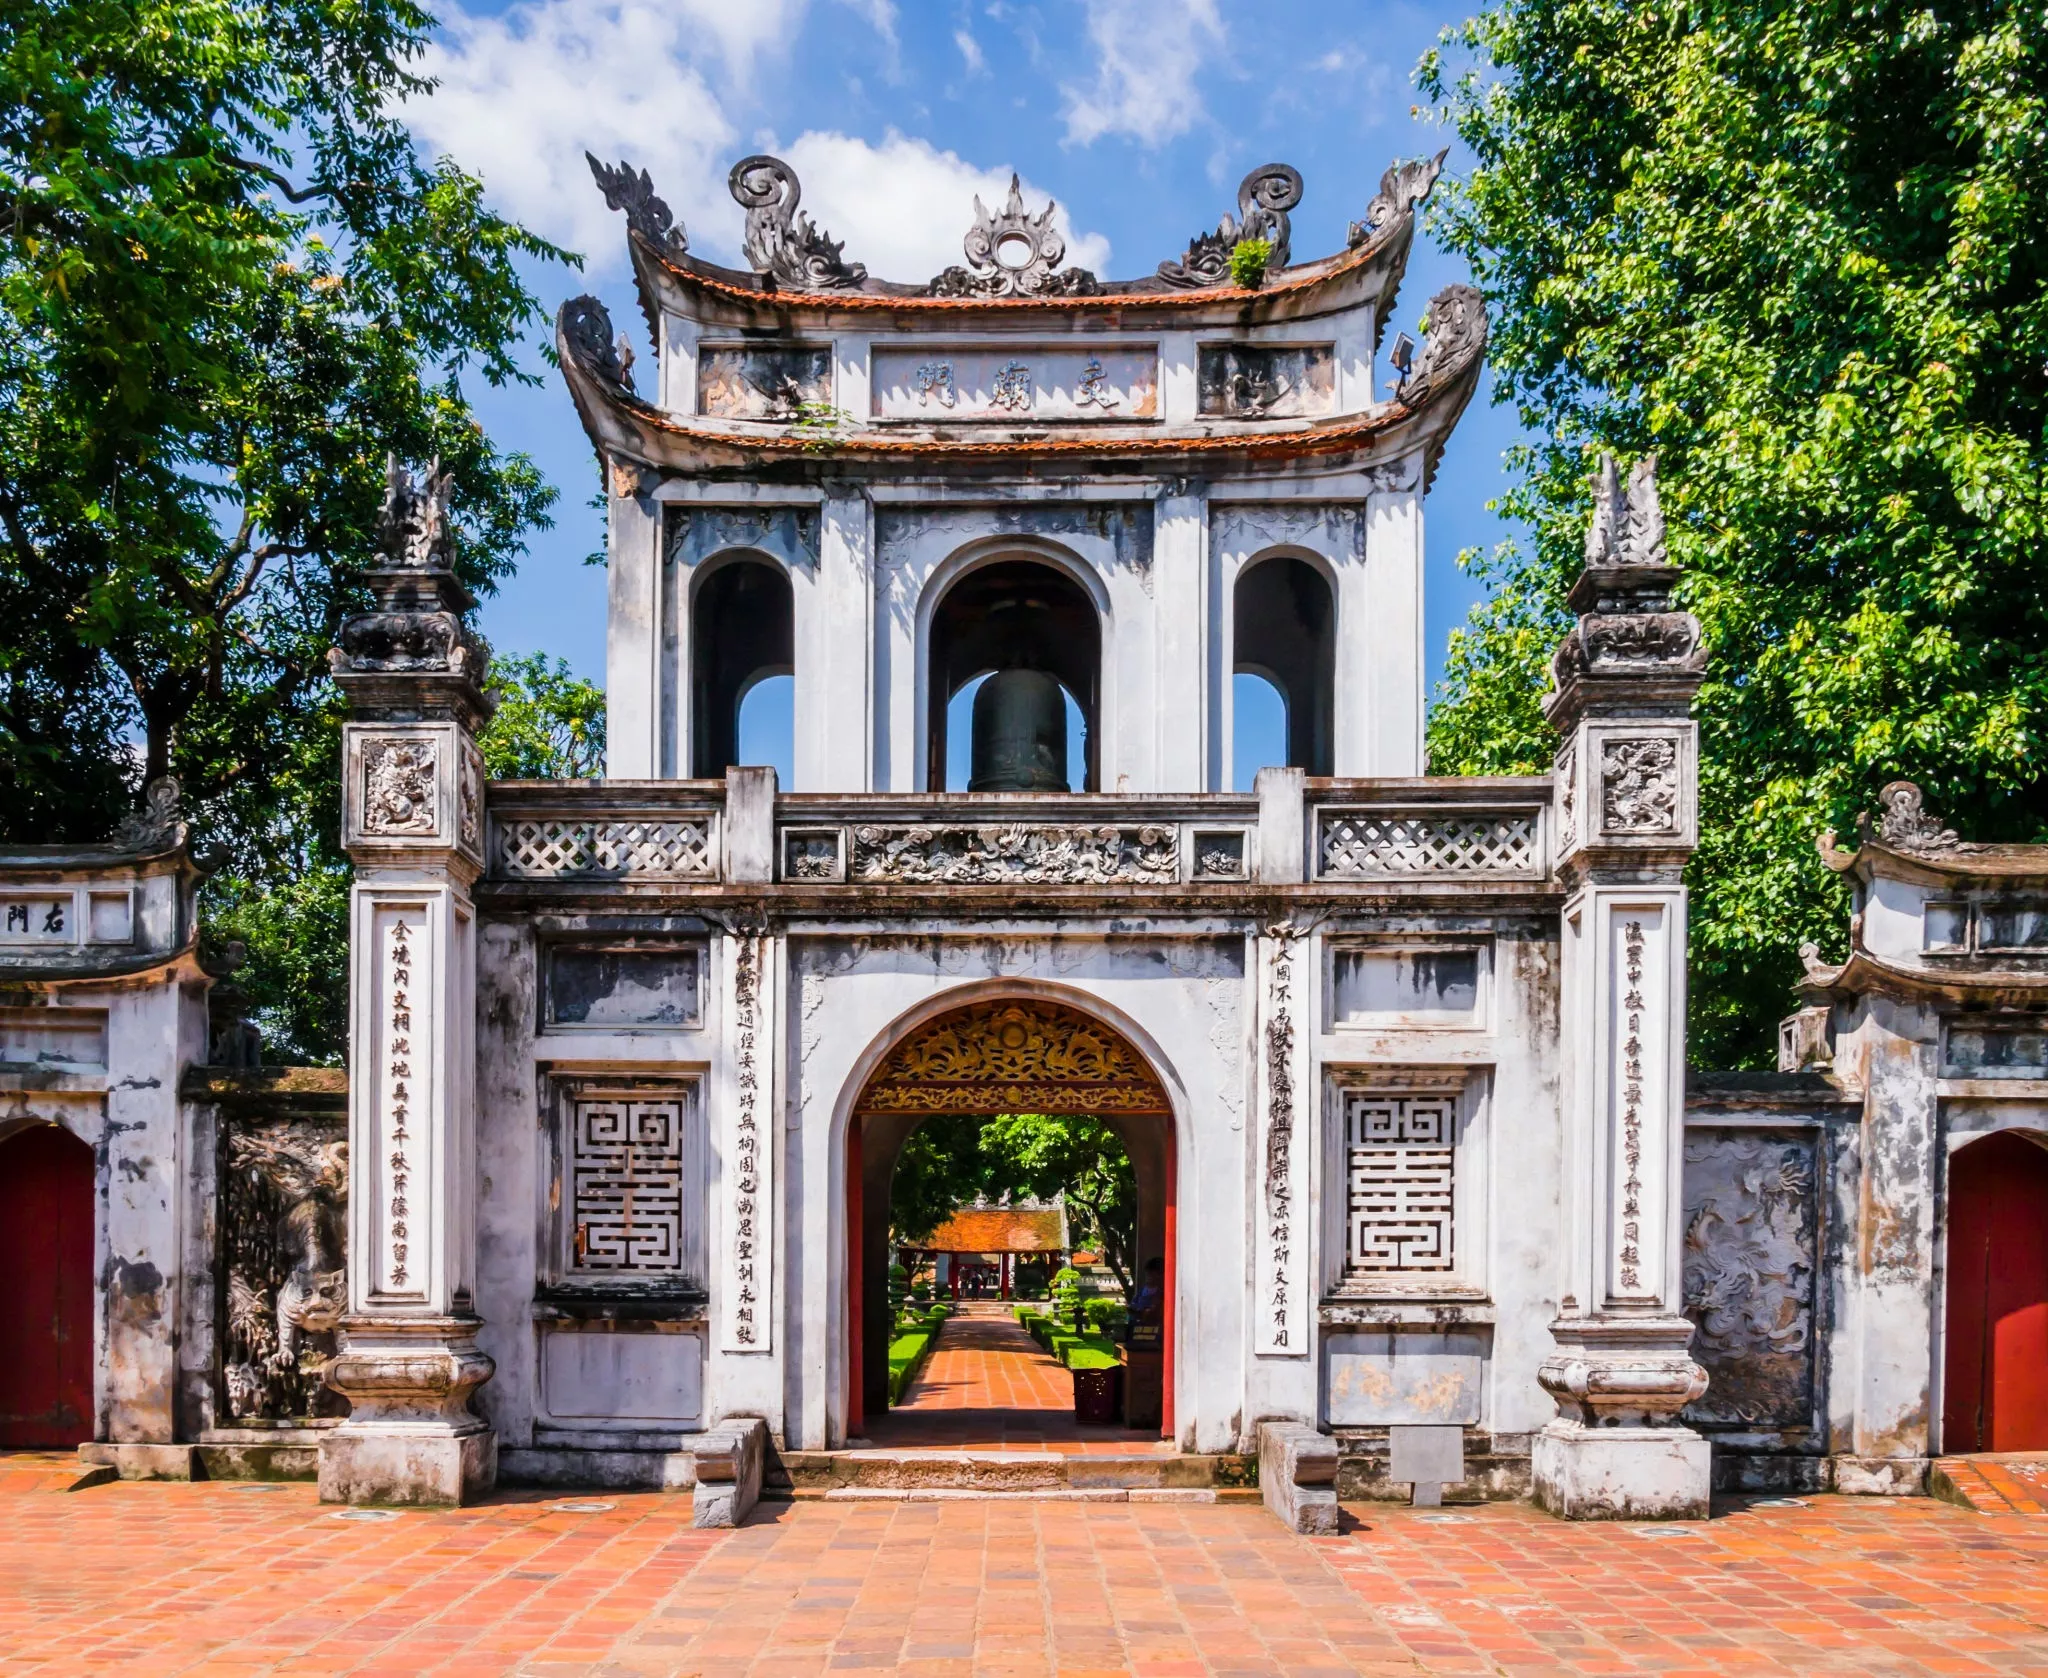 Temple of Literature in Vietnam, East Asia | Architecture - Rated 3.8